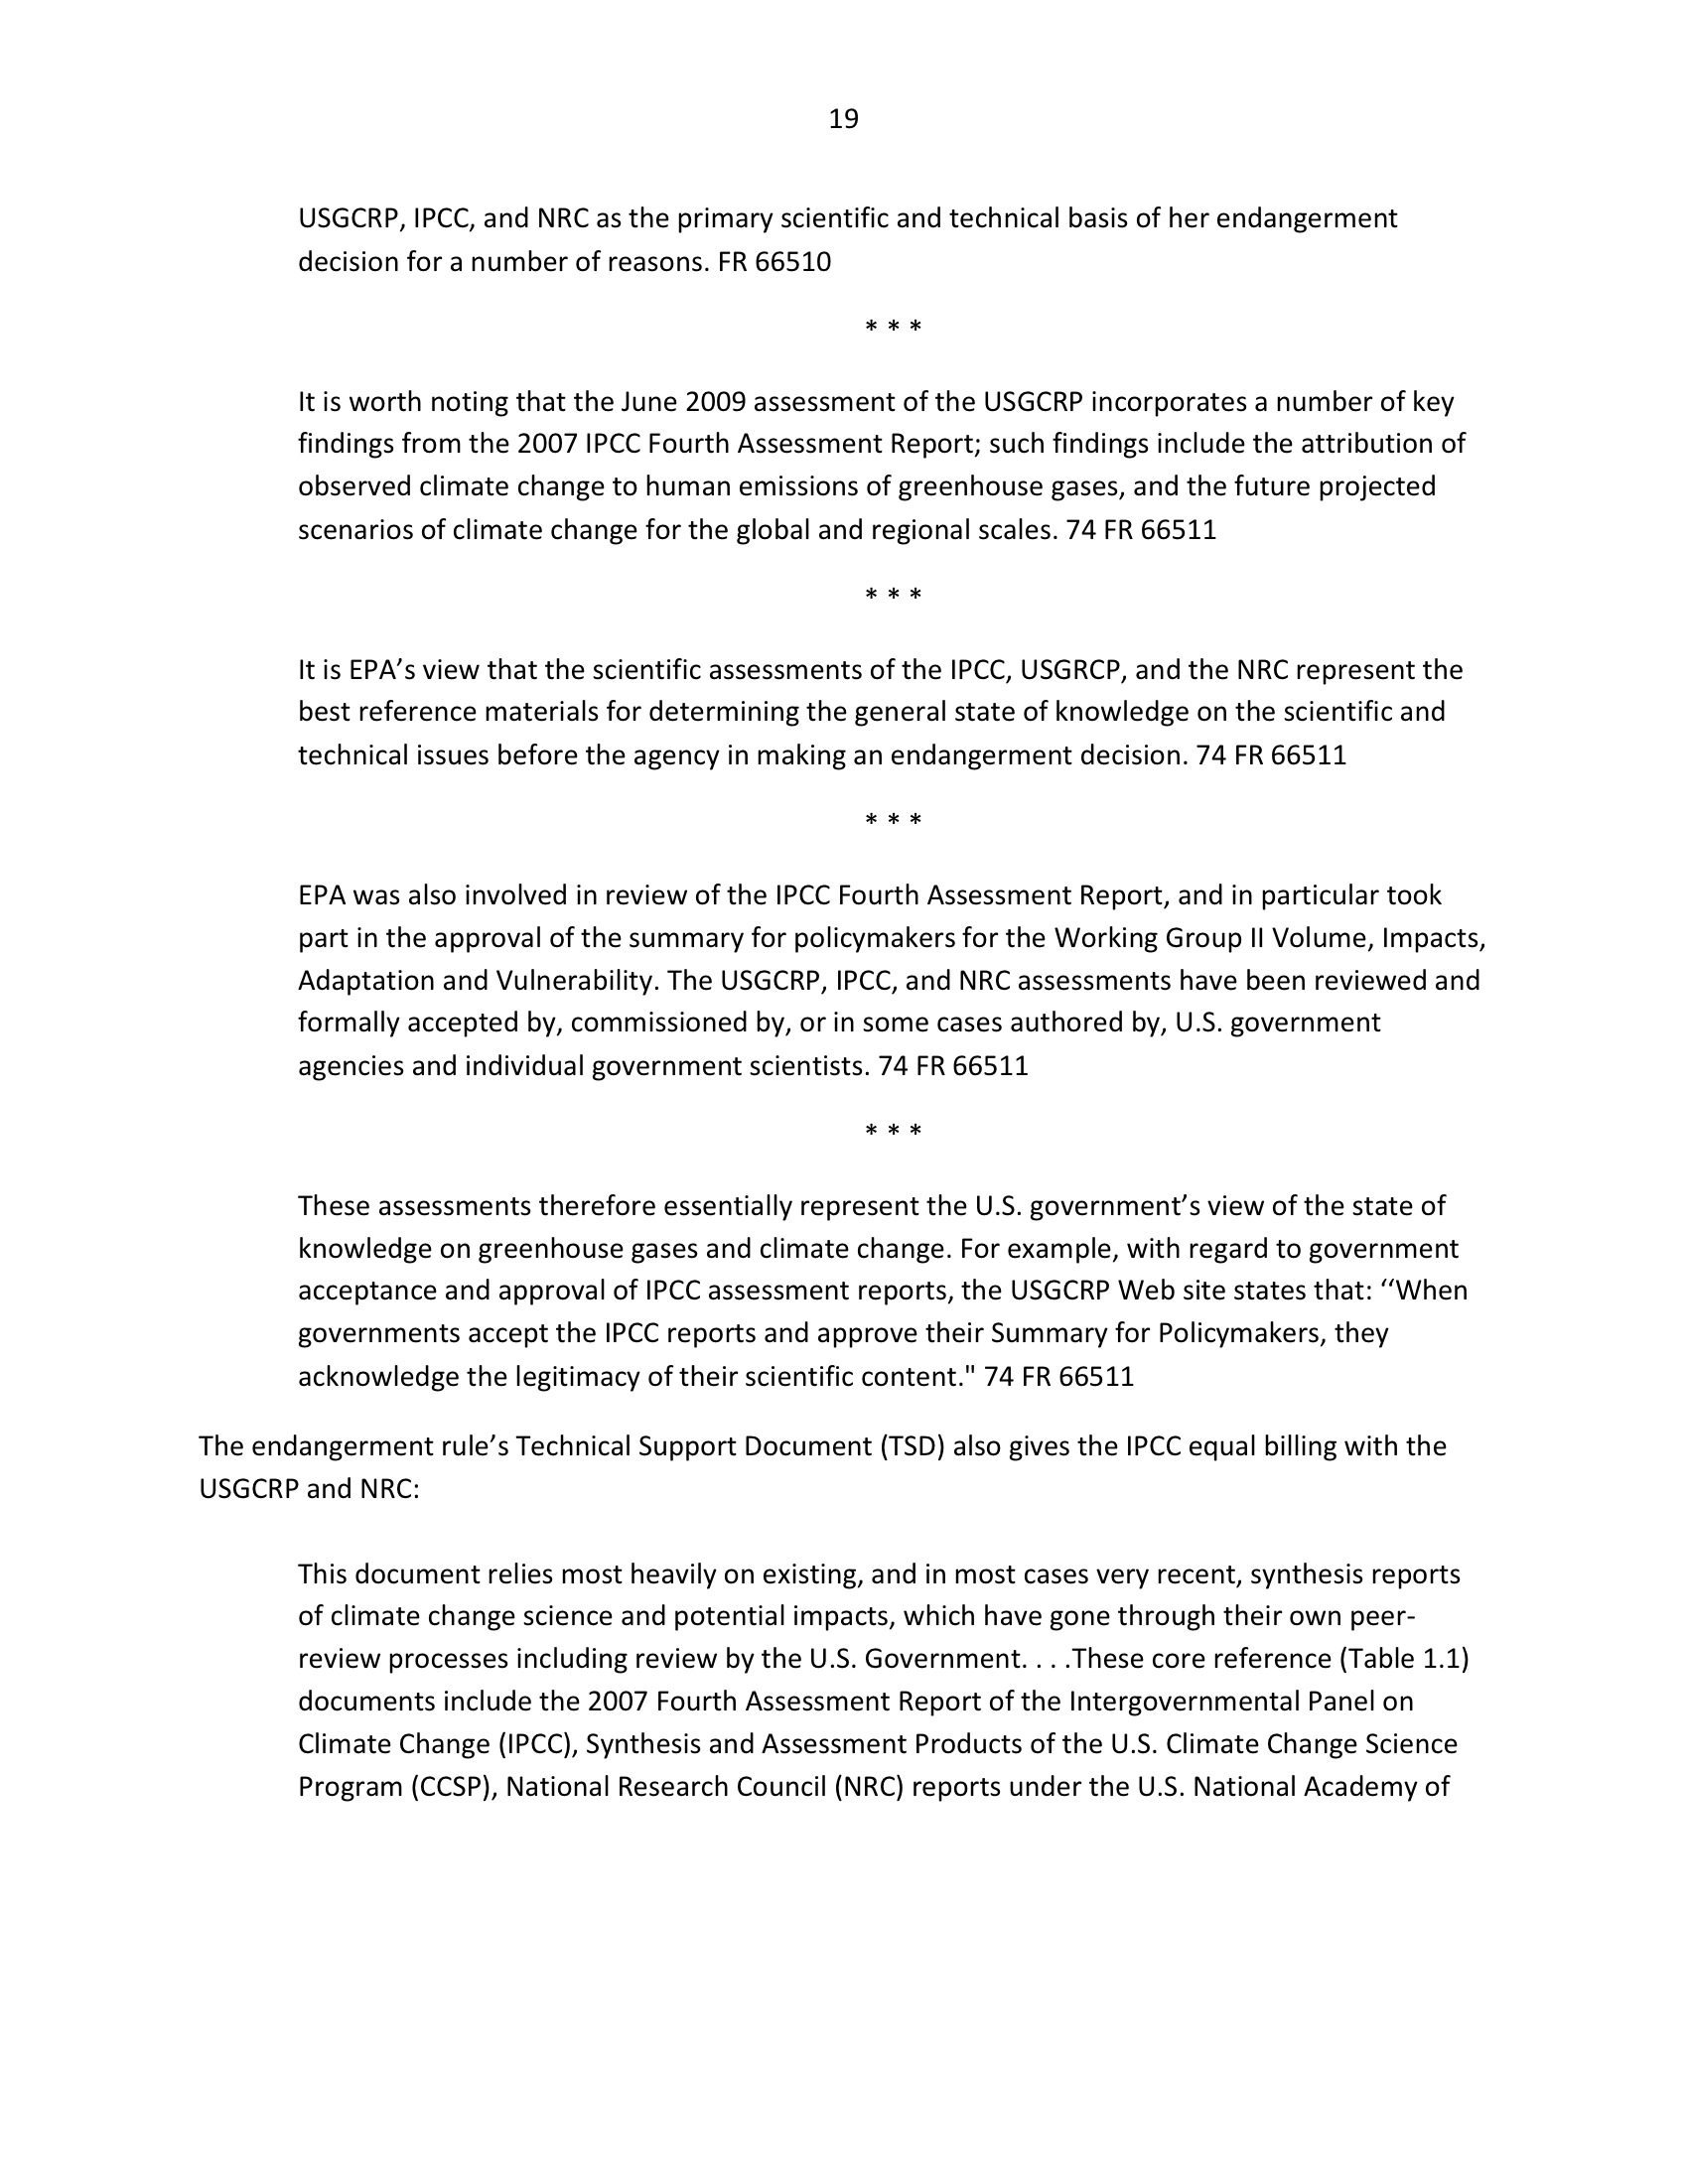 Marlo Lewis Competitive Enterprise Institute and Free Market Allies Comment Letter on NEPA GHG Guidance Document 91-19